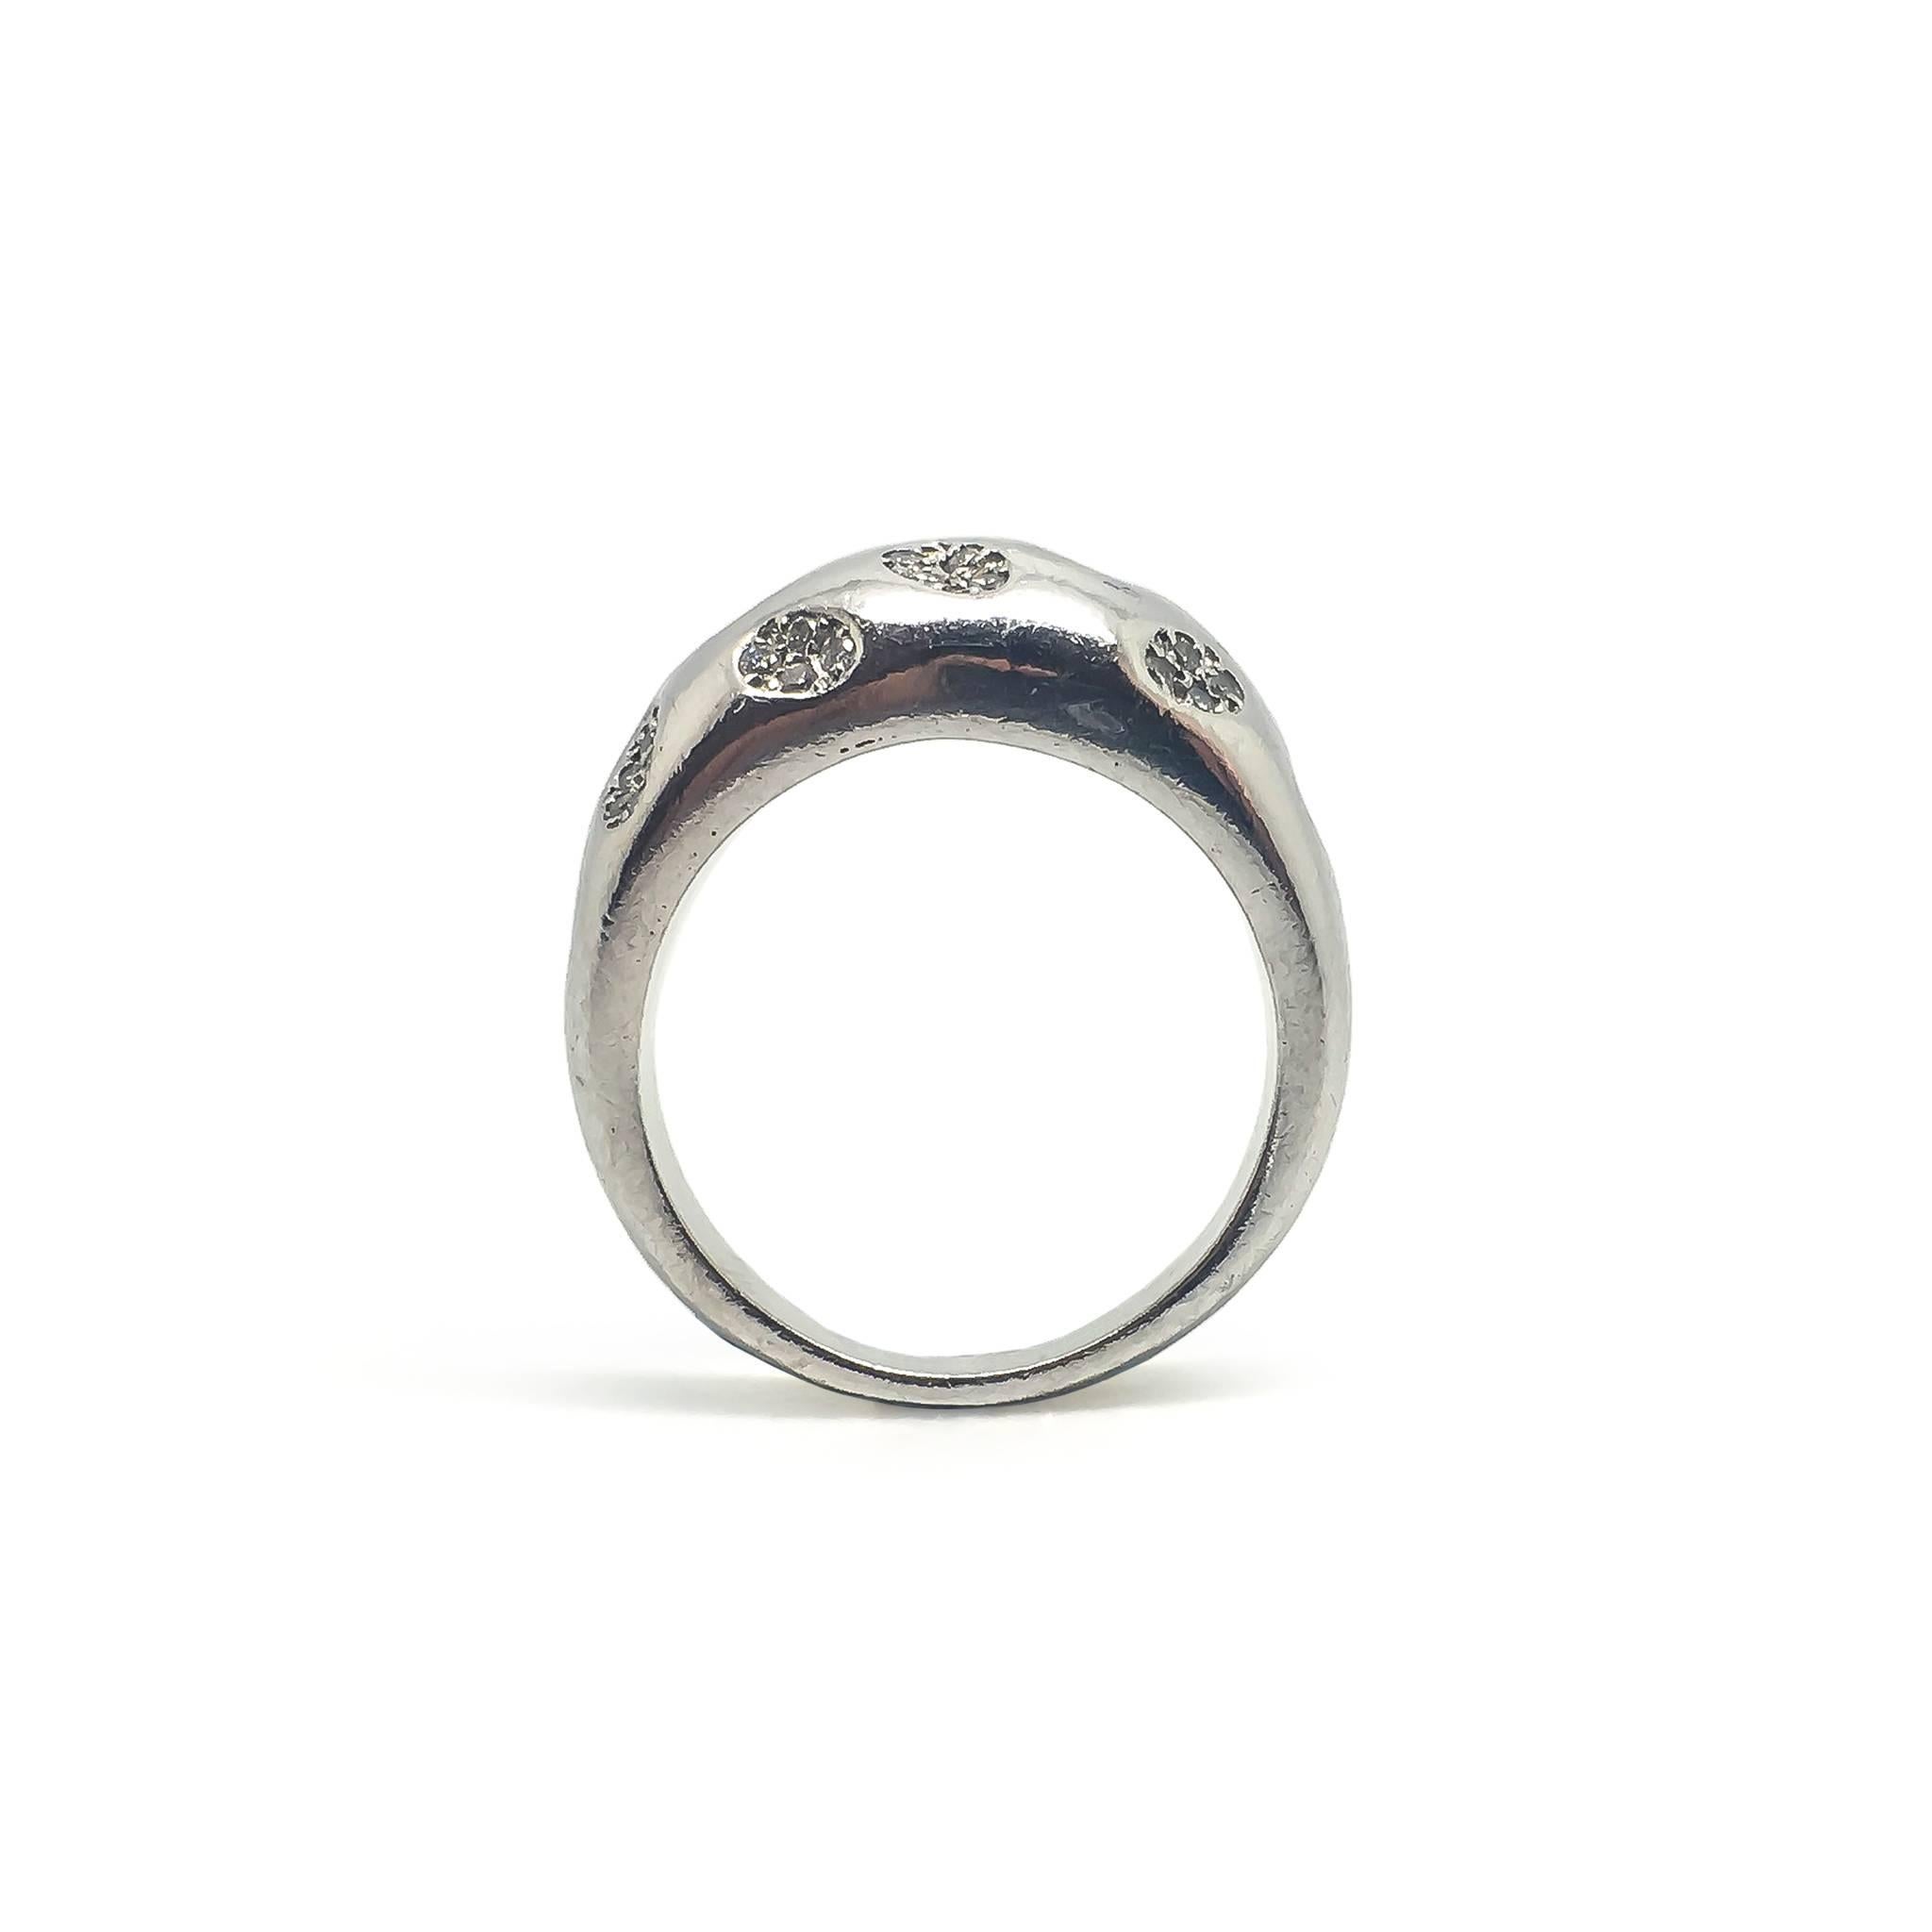 A heavy platinum and diamond ring by Farone.

The ring weighs 15.4g. 

UK size R 1/2

US size 8 7/8

The ring is crafted from platinum and set with diamonds across the surface.

Signed Farone inside with a 950 mark for Platinum.